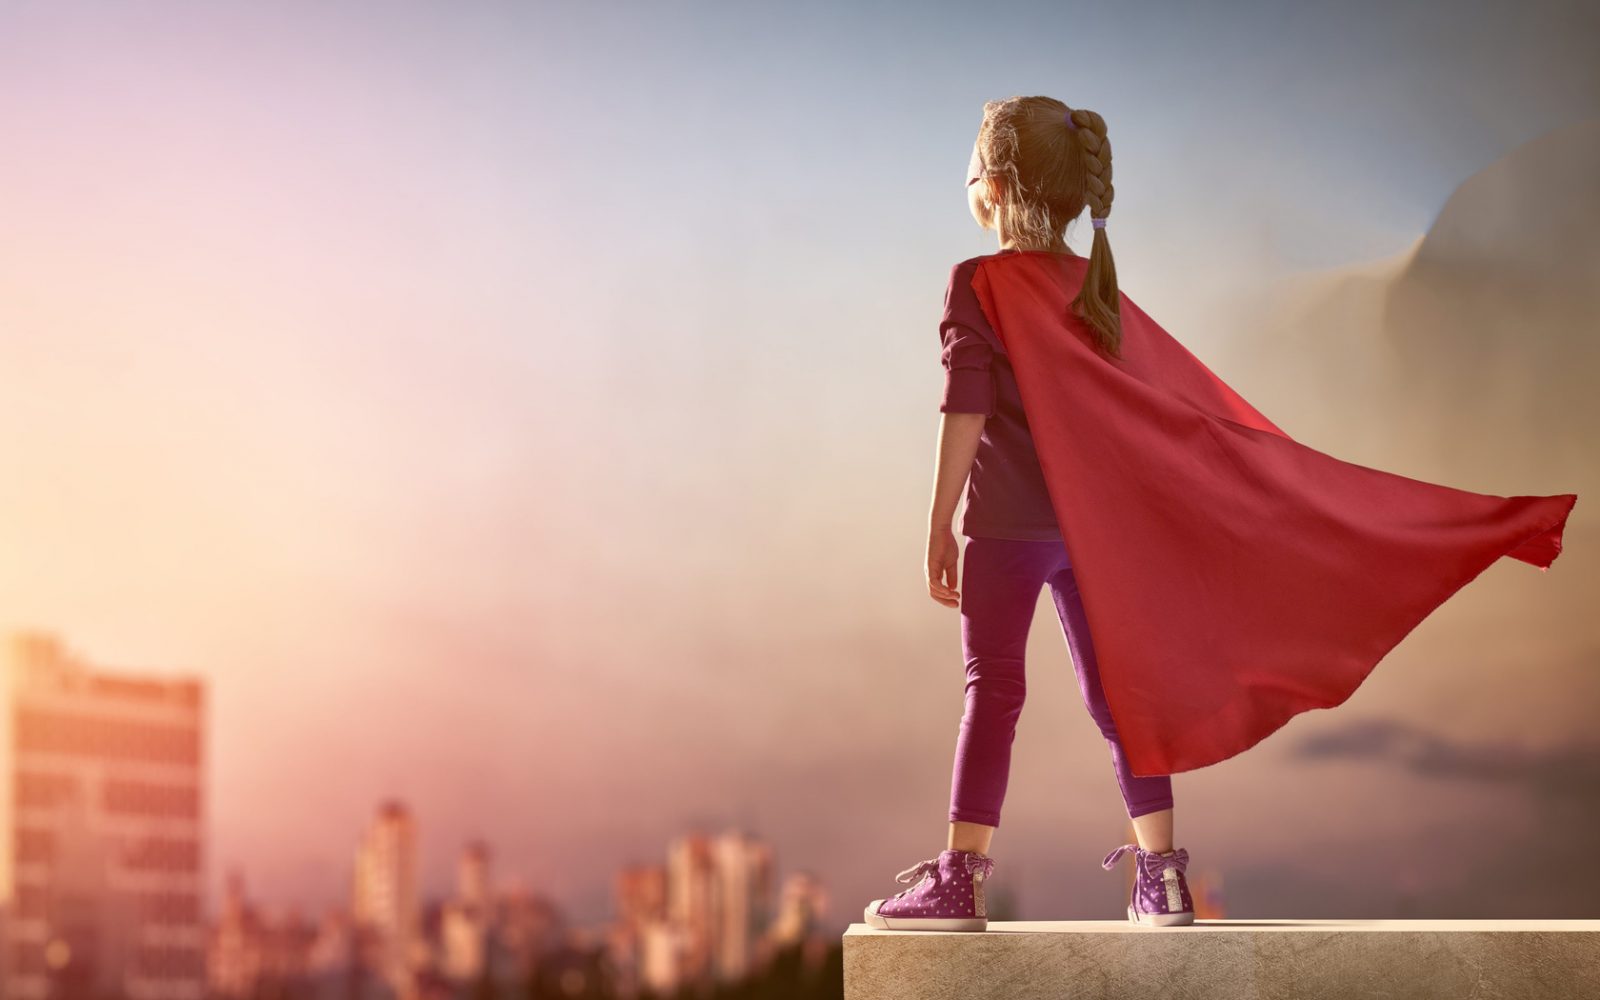 Form Your Superhero Dream Team and We’ll Guess Your Age With 99% Accuracy Kid Superhero Costume